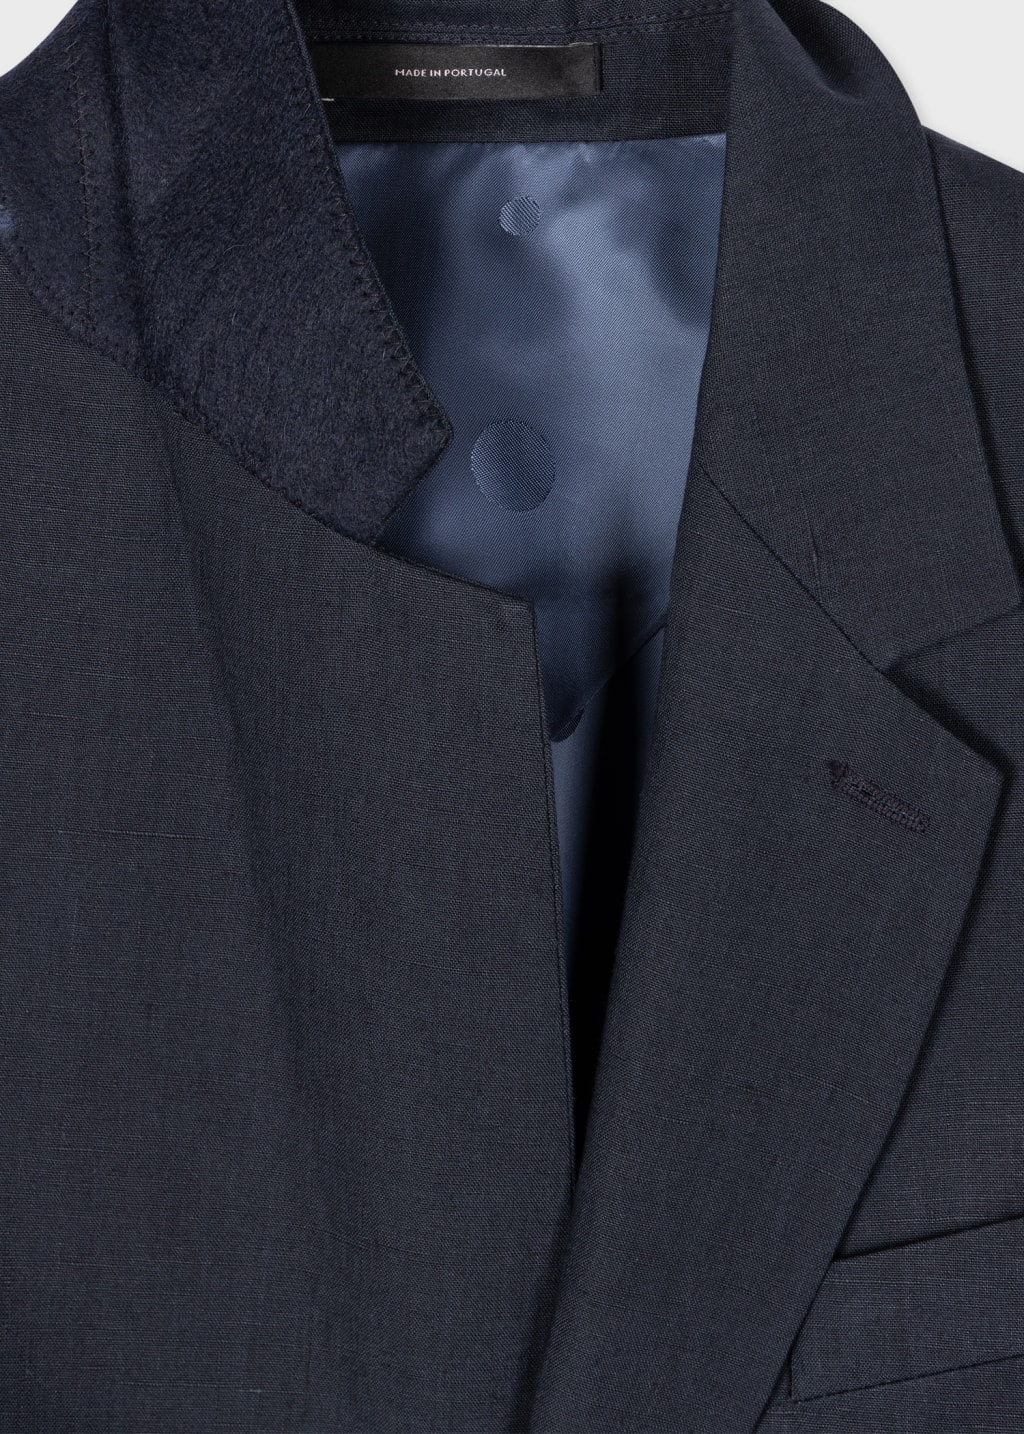 Detail View - Navy Linen Buggy-Lined Blazer Paul Smith